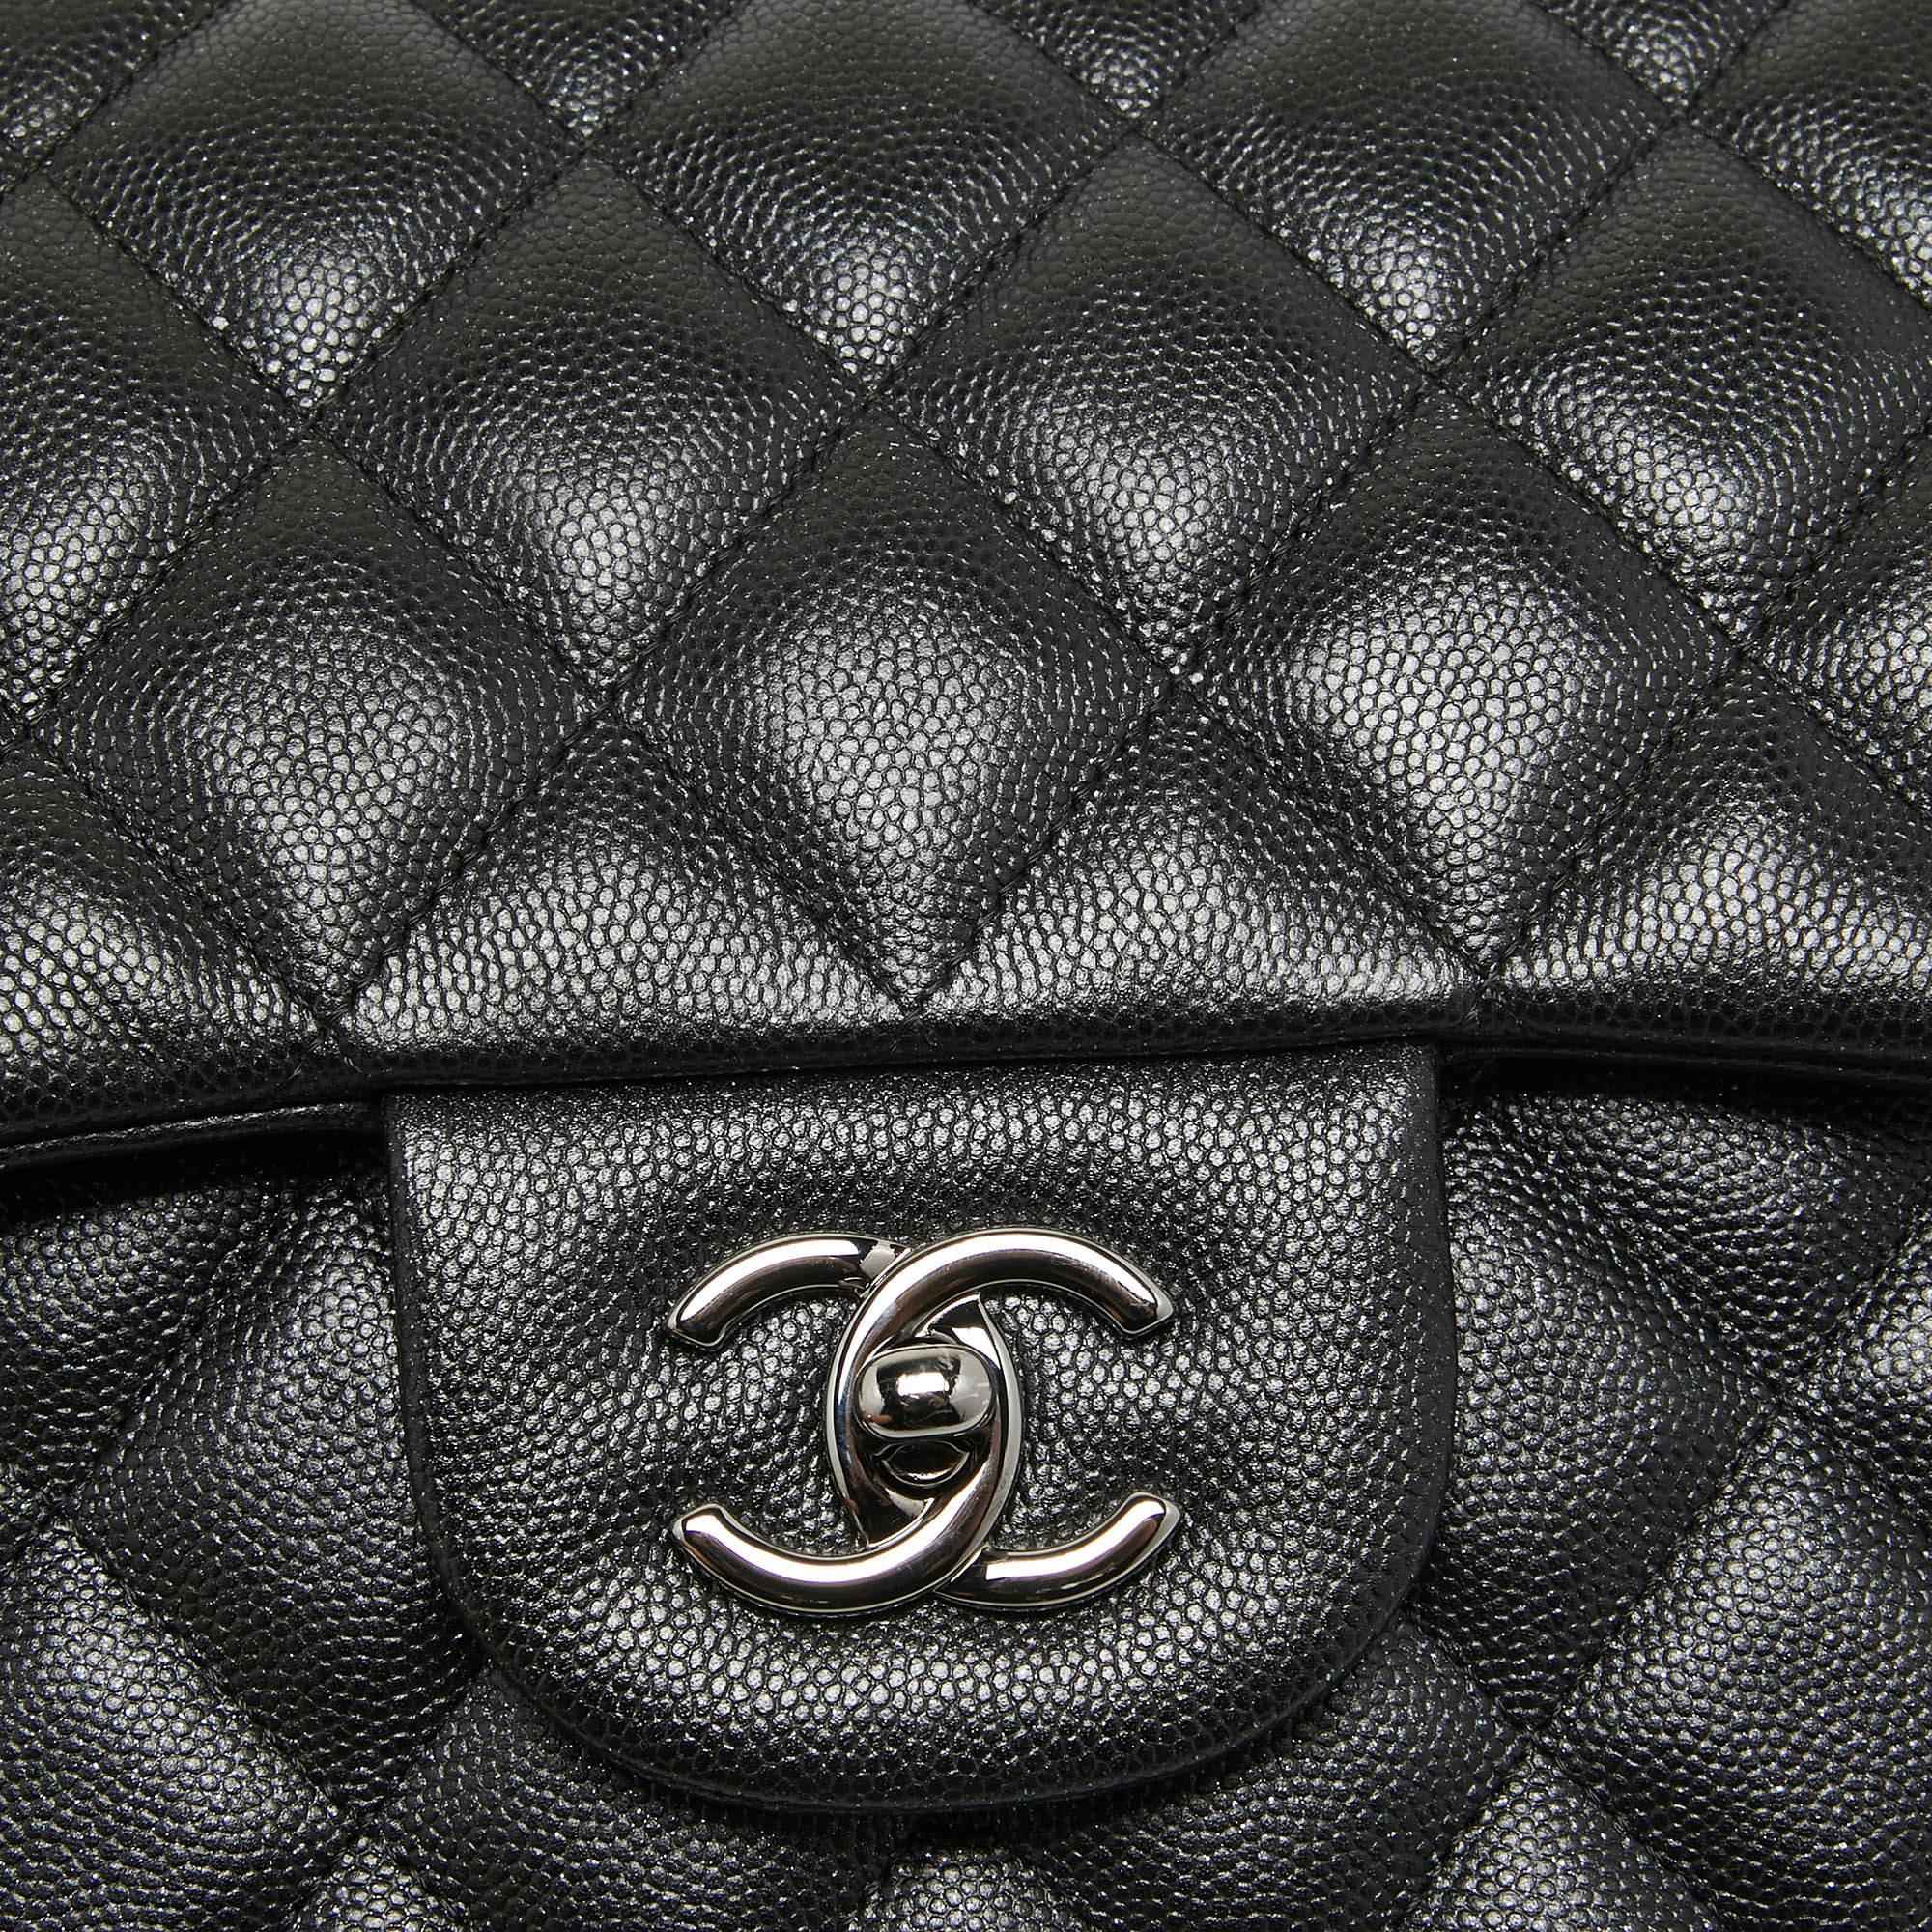 Chanel Black Quilted Caviar Leather Jumbo Classic Double Flap Bag 8